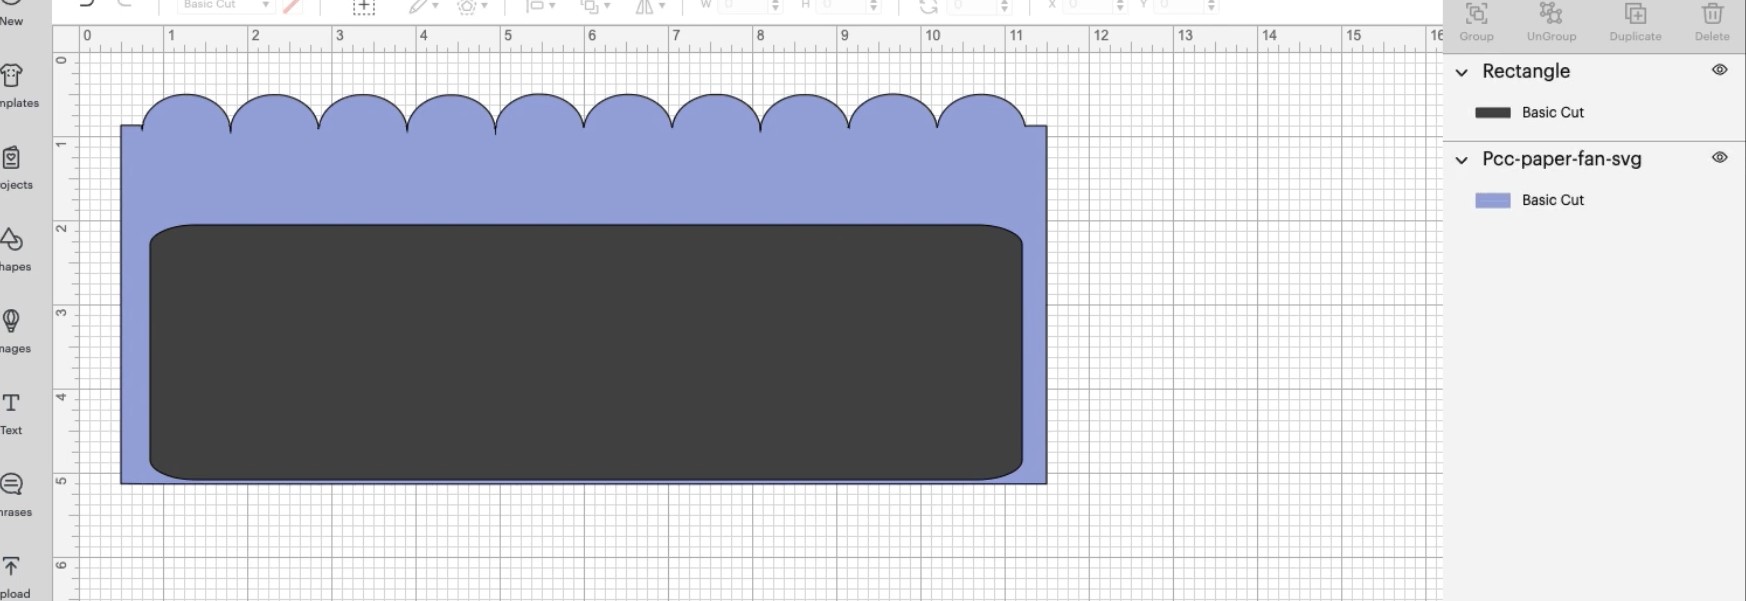 Fan template with rectangle layered on top. 